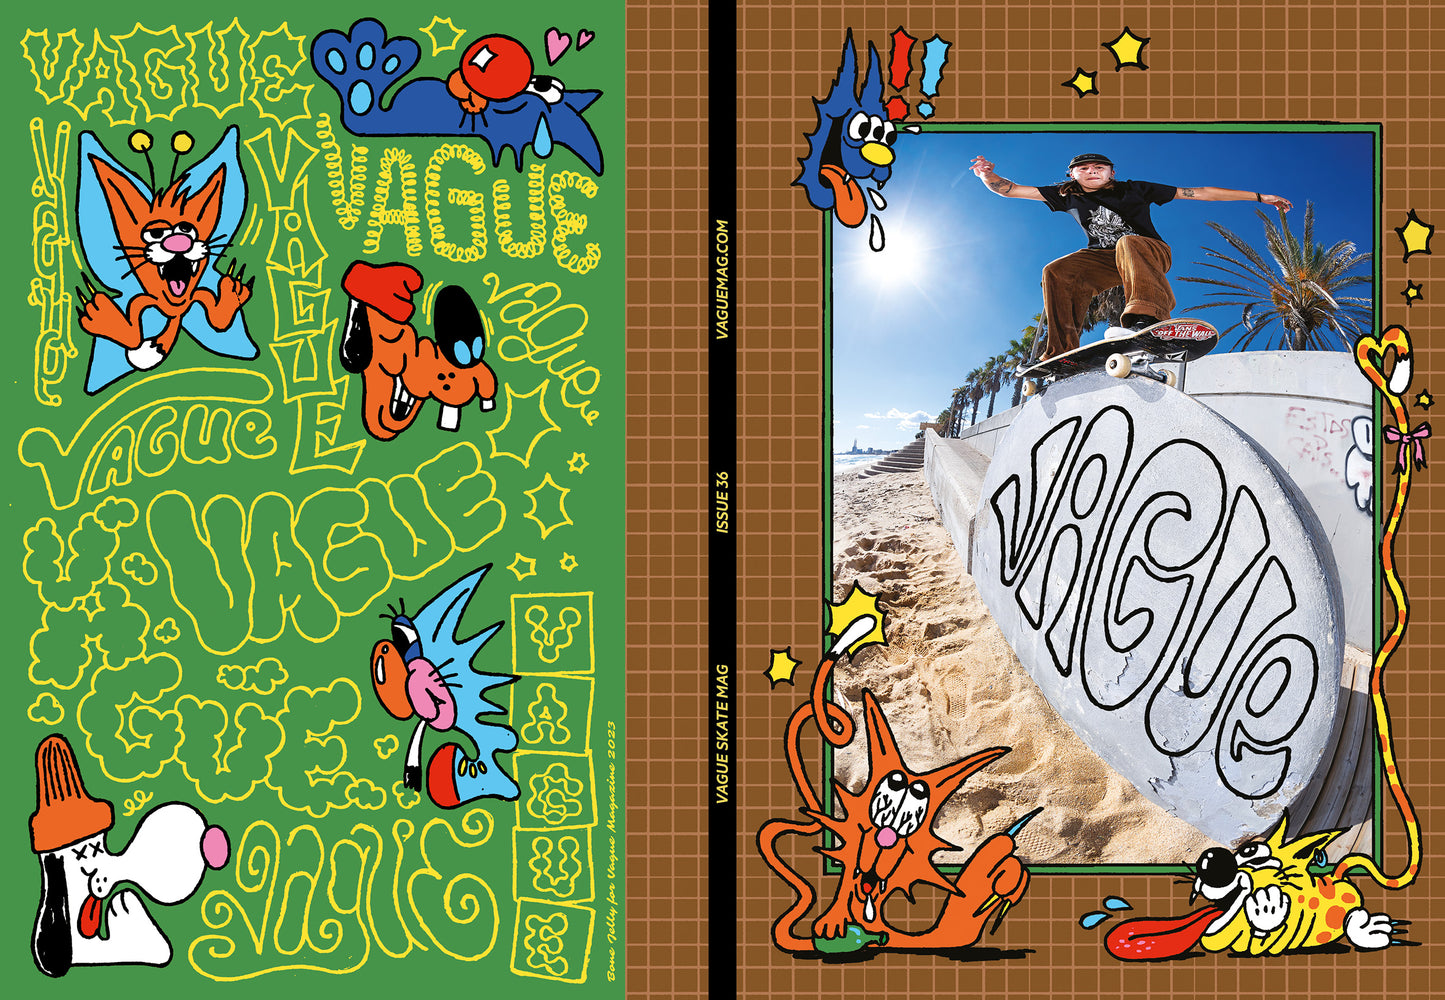 Vague Issue 36